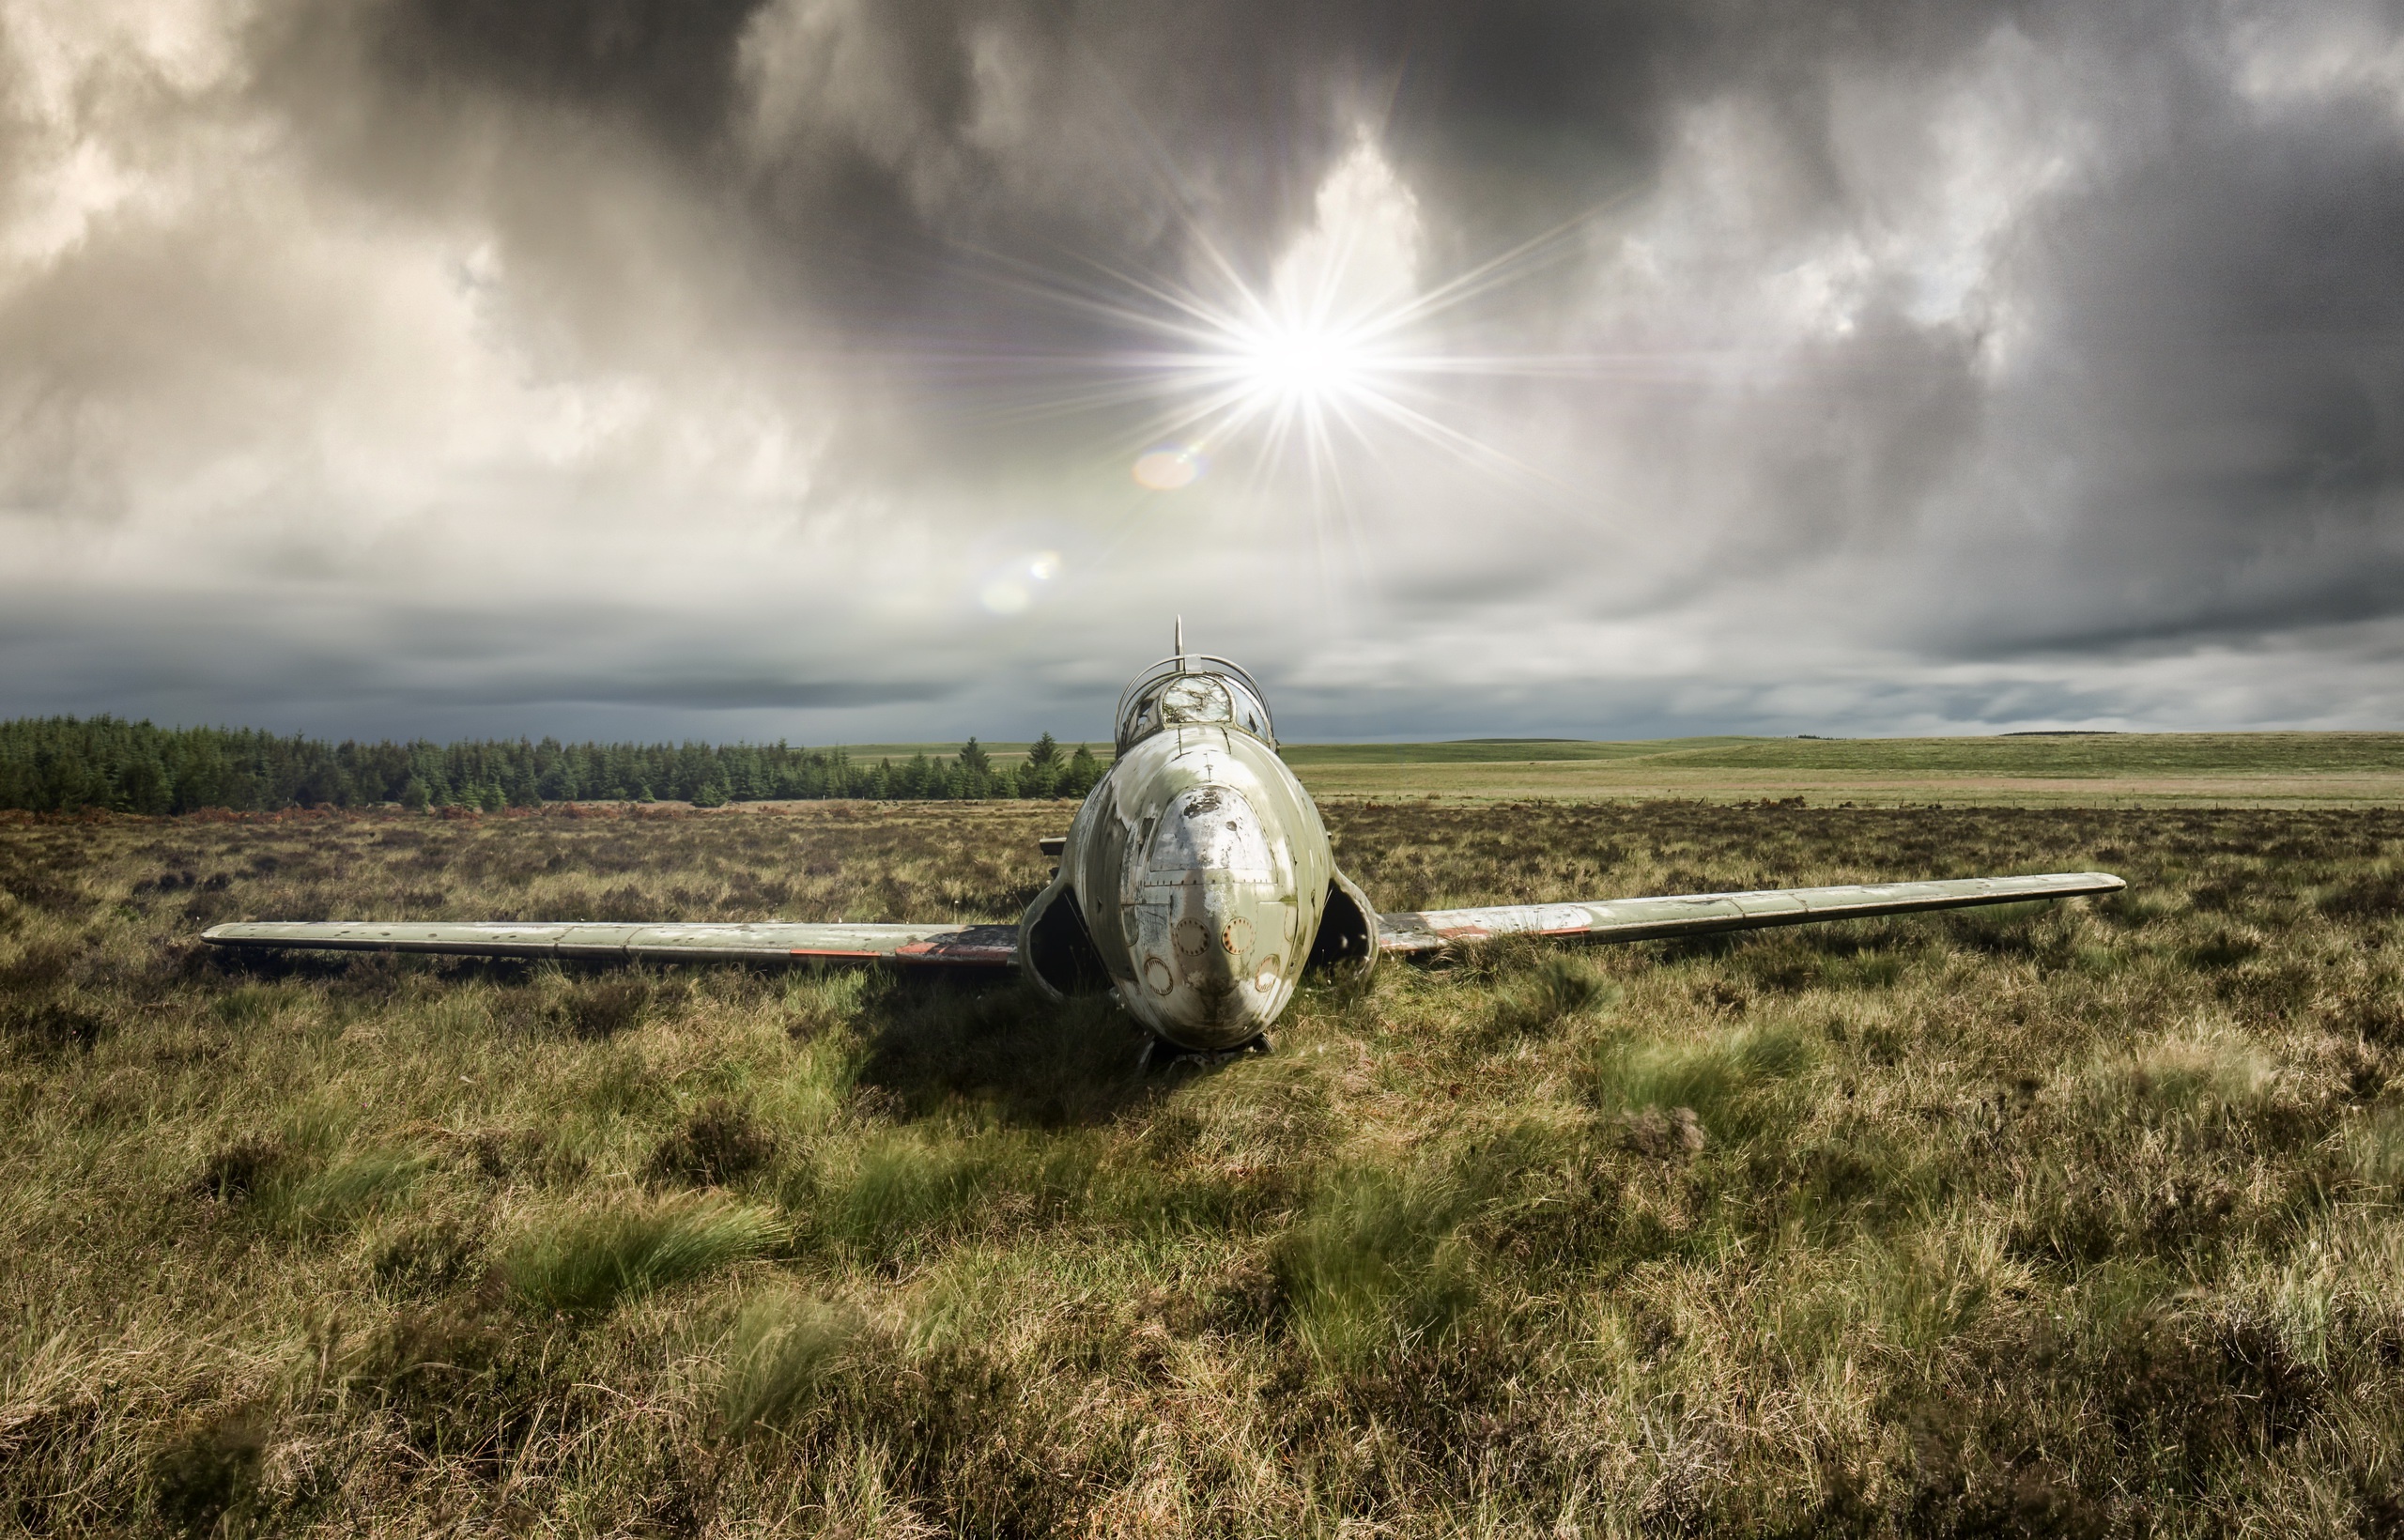 General 2560x1640 aircraft wreck vehicle military aircraft sky landscape